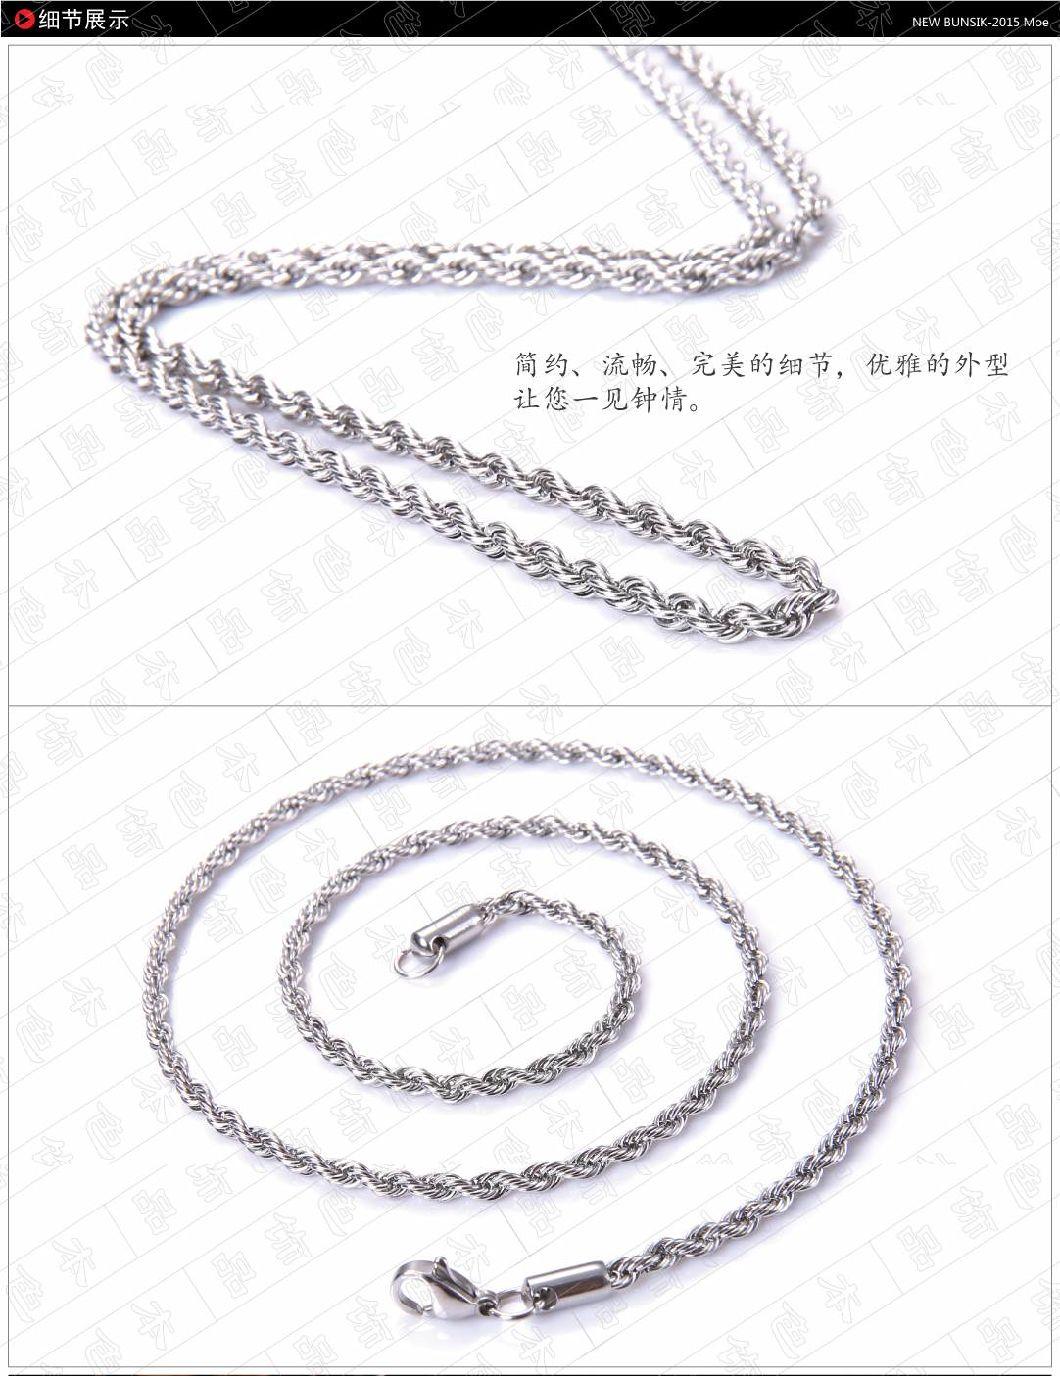 18K Gold PVD Plated Rope Chain 2.5mm-5mm Stainless Steel Chain Necklace for Unisex Chains 16 Inches to 36 Inches